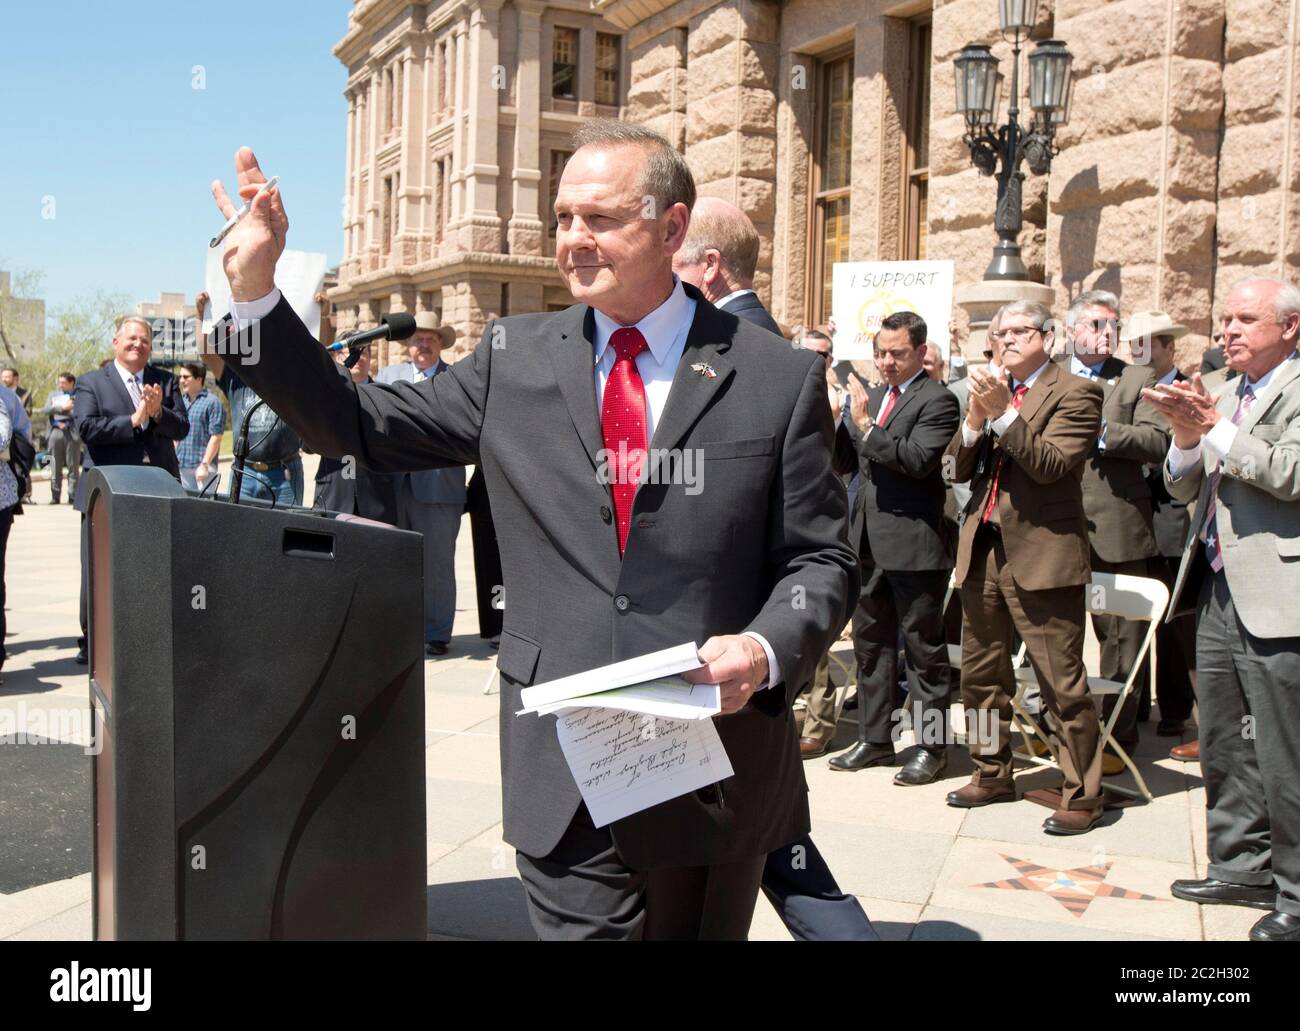 Austin Texas USA, March 24 2015: Controversial Alabama Supreme Court Chief Justice Roy Moore waves to the crowd after speaking alongside conservative Texas legislators opposing gay marriage at a Texas Capitol rally.  Moore has told Alabama judges to ignore a recent federal court ruling allowing gay marriage in the state.   ©Bob Daemmrich Stock Photo